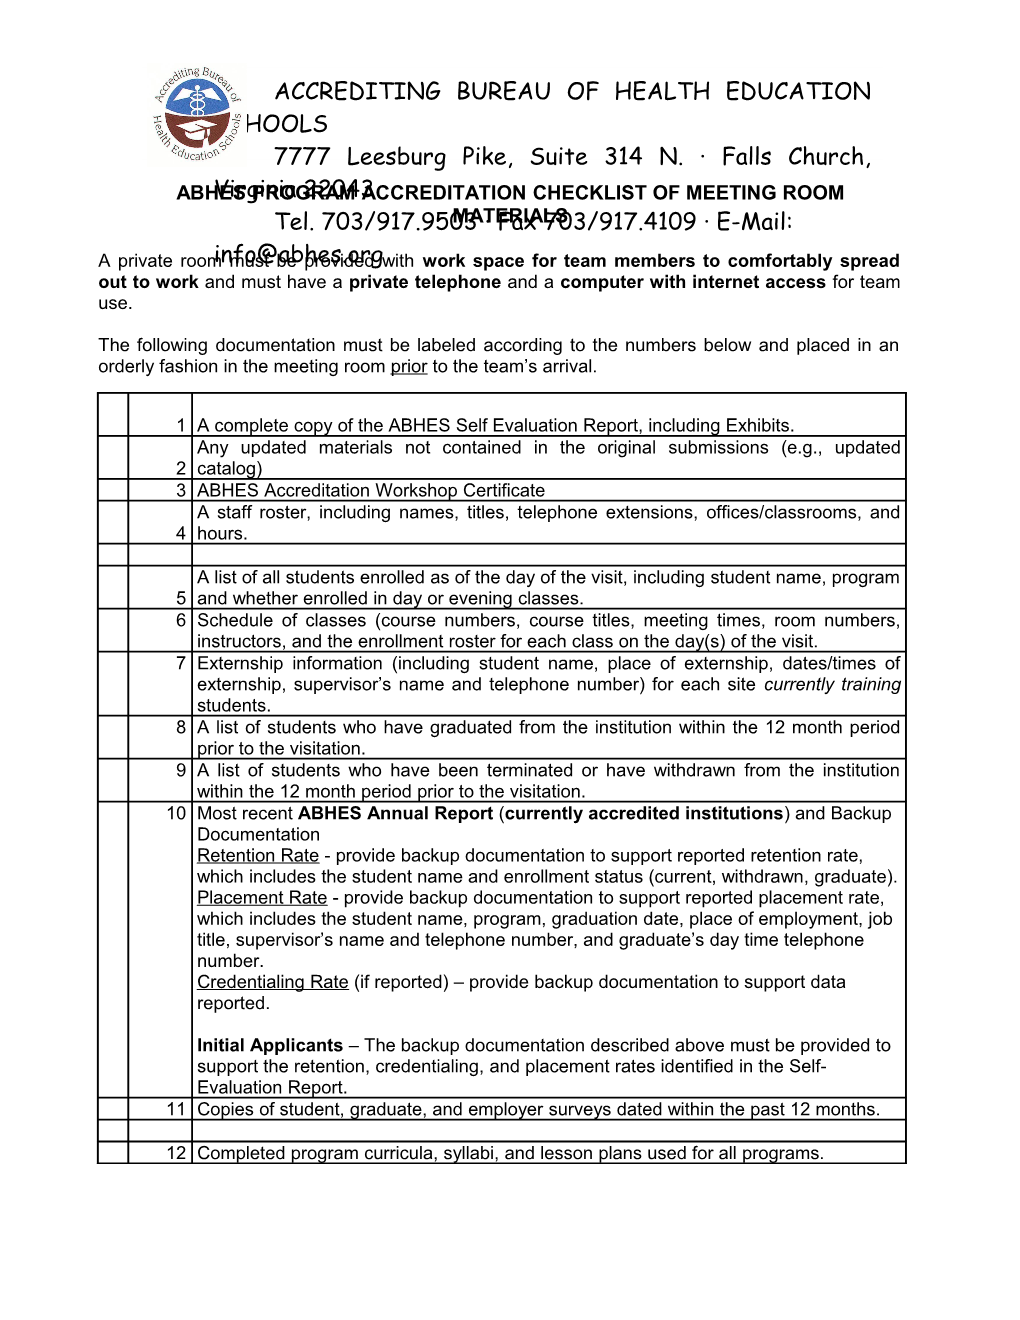 Abhes Program Accreditation Checklist of Meeting Room Materials